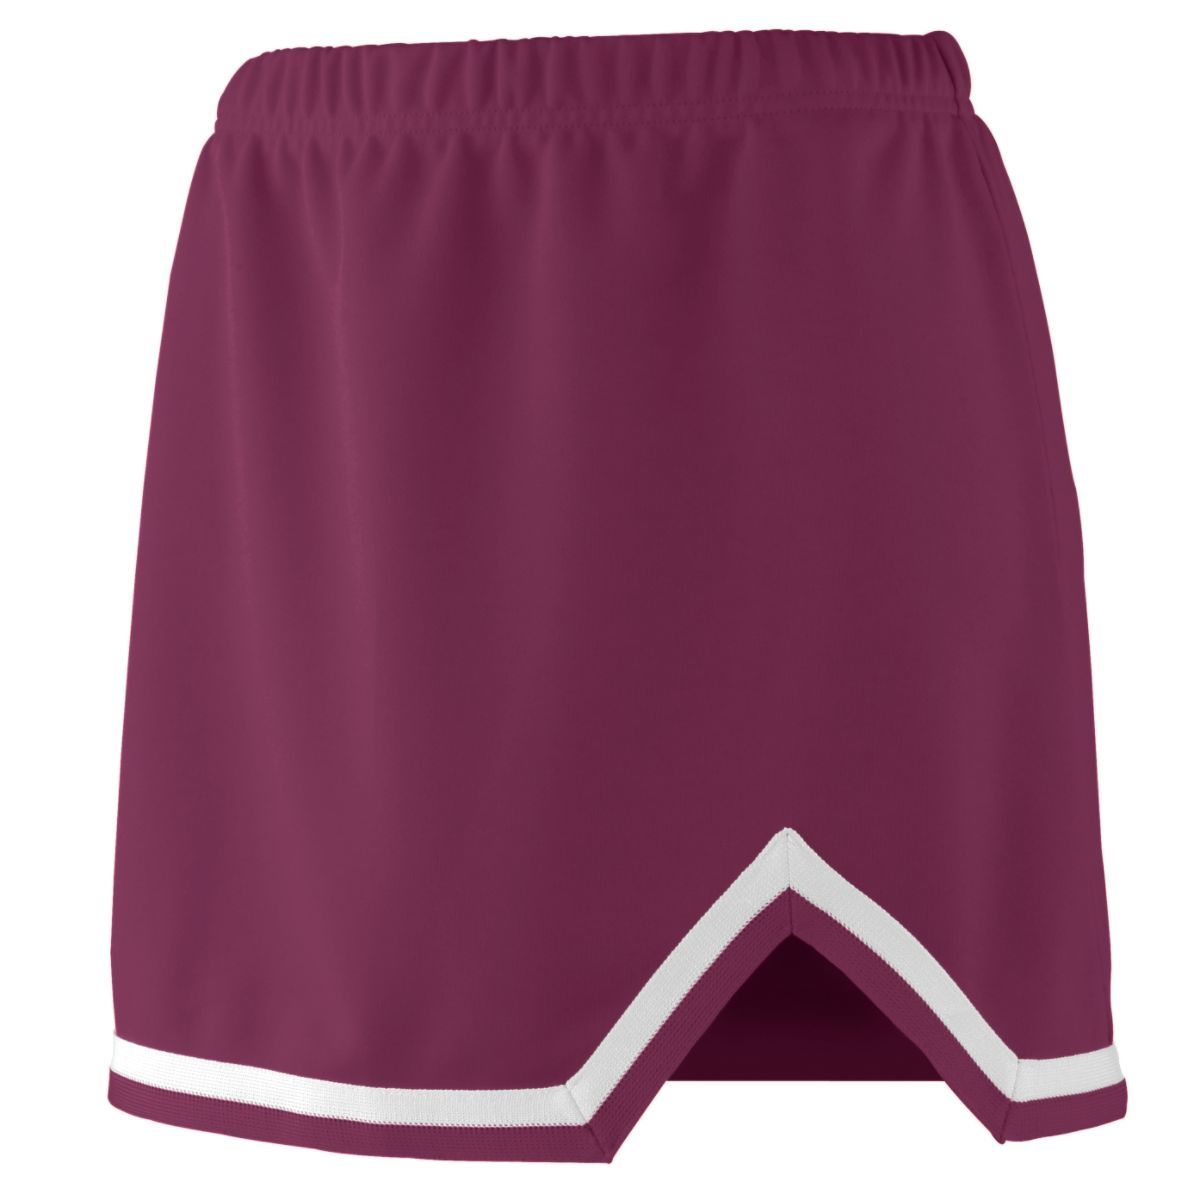 Augusta Sportswear Ladies Energy Skirt in Maroon/White  -Part of the Ladies, Augusta-Products, Cheer product lines at KanaleyCreations.com